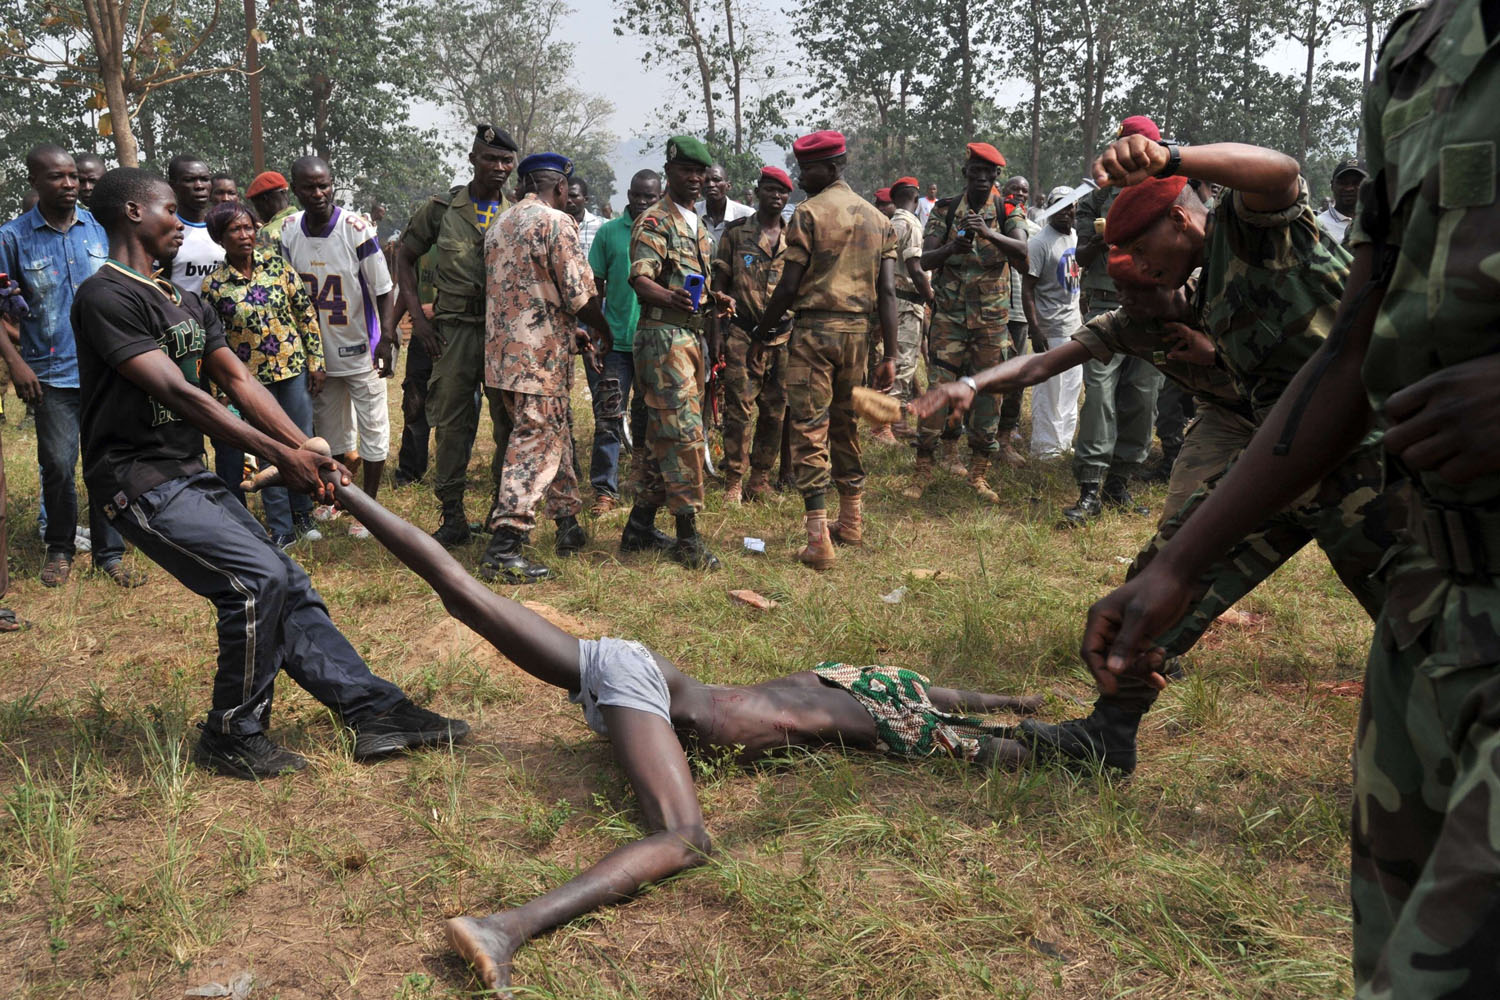 Feb. 5, 2014. Members of the Central African Armed Forces (FACA) lynch a man suspected of being a former Séléka rebel in Bangui, Central African Republic.